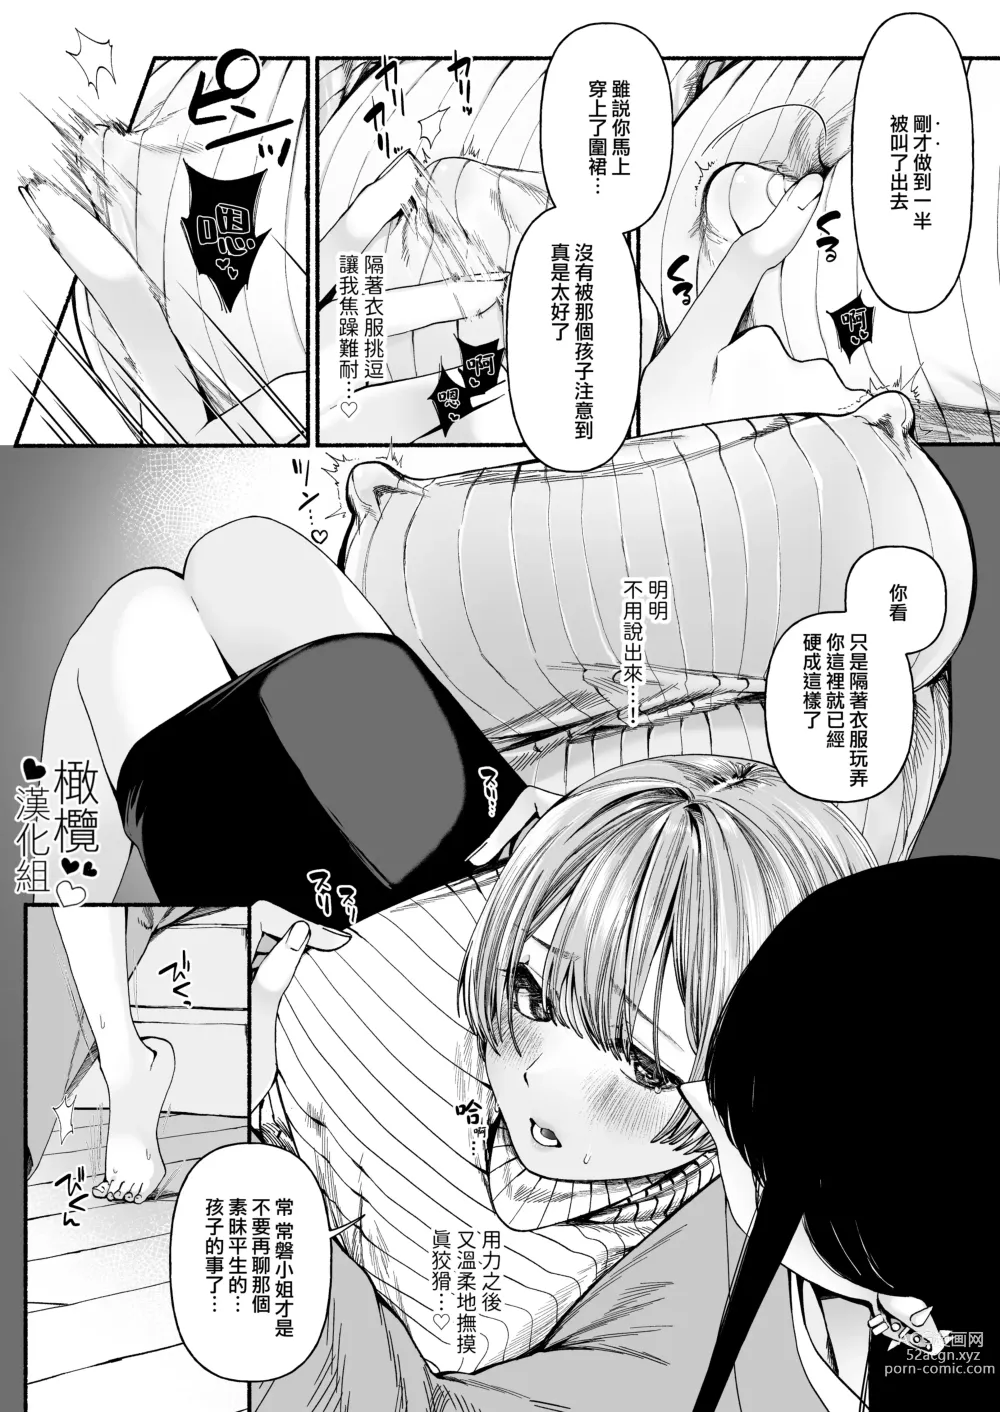 Page 10 of doujinshi 因報春鳥已死